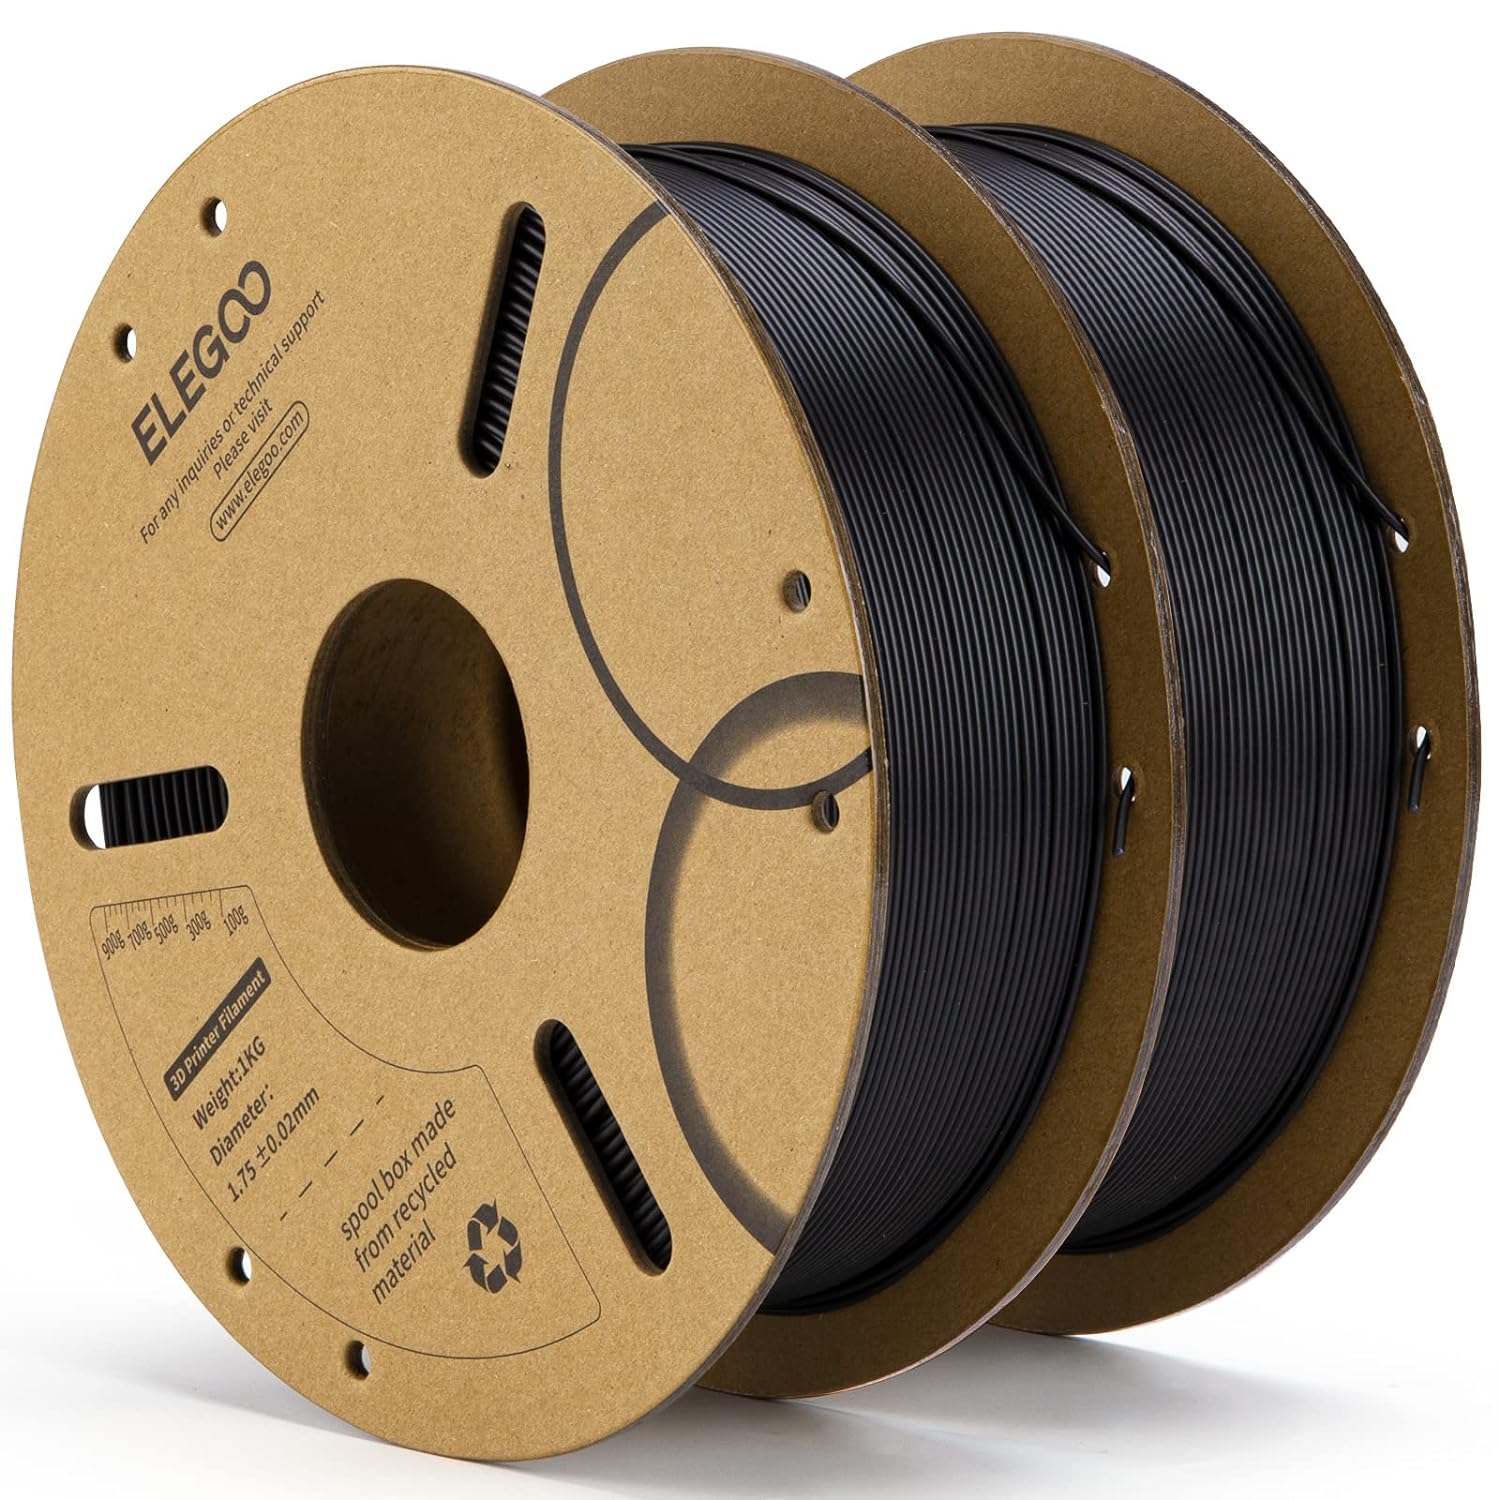 Elegoo Filament | Best Cheap PLA Filament from Amazon: What to buy?